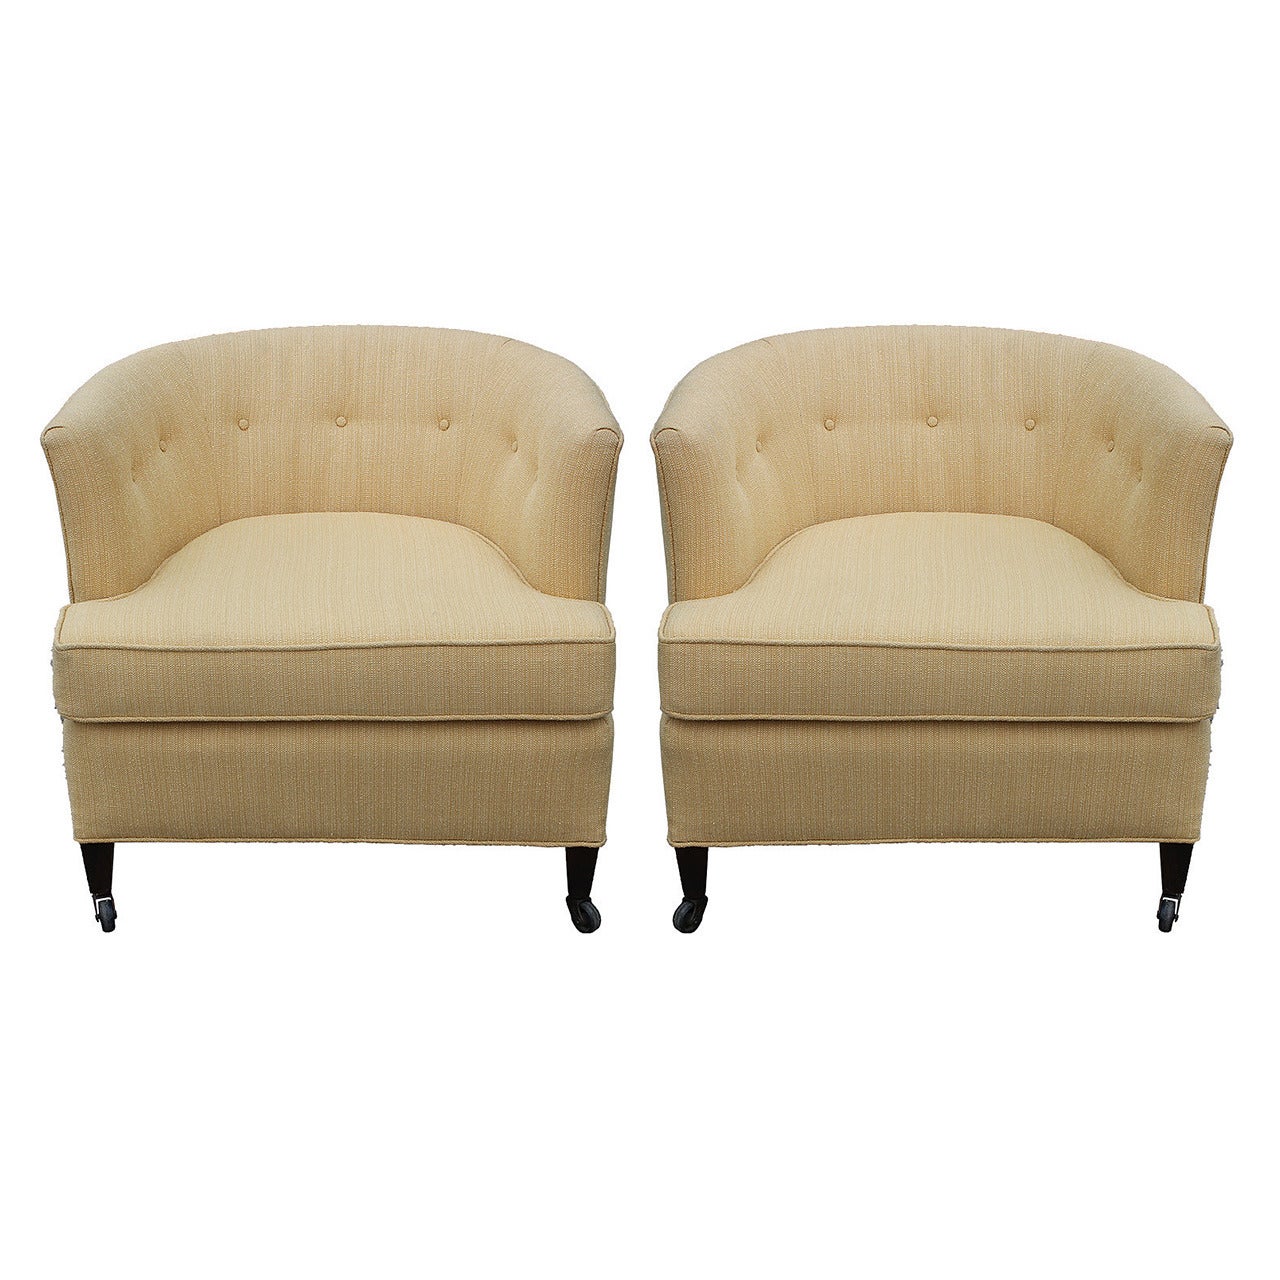 Clean Pair of Barrel Back Club Chairs